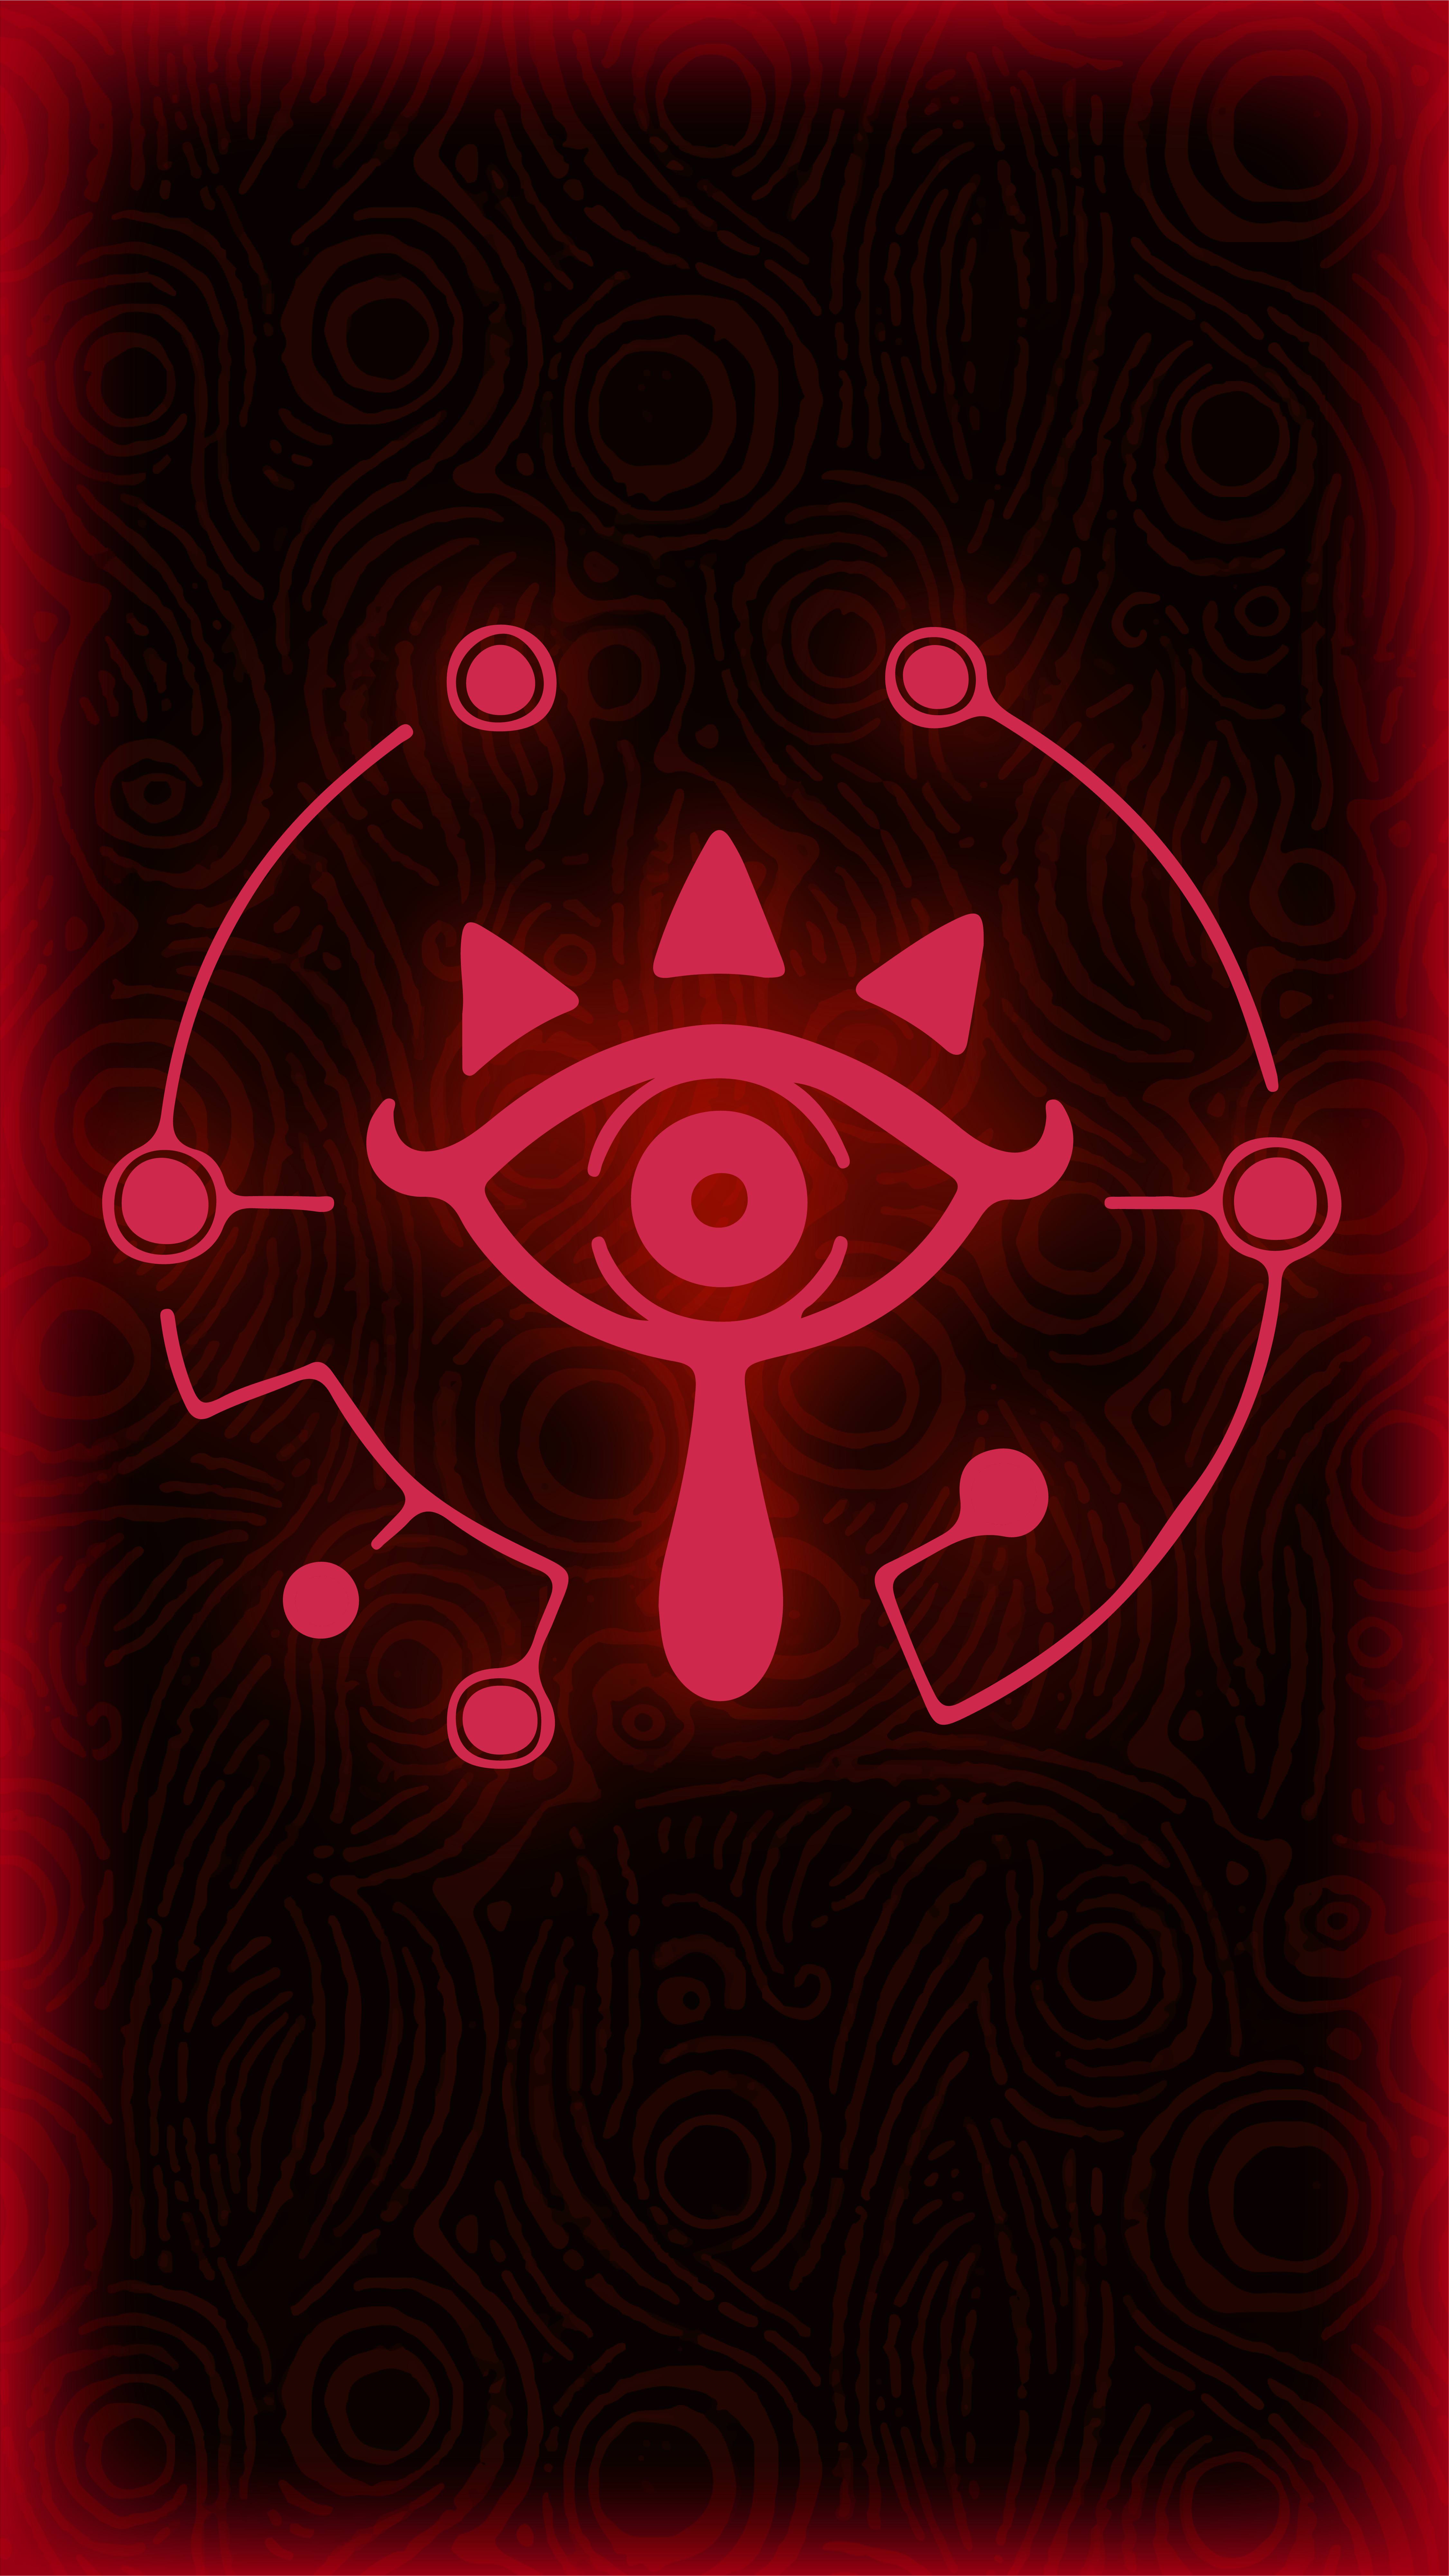 Made a sheikah slate wallpapers for iPhone X.